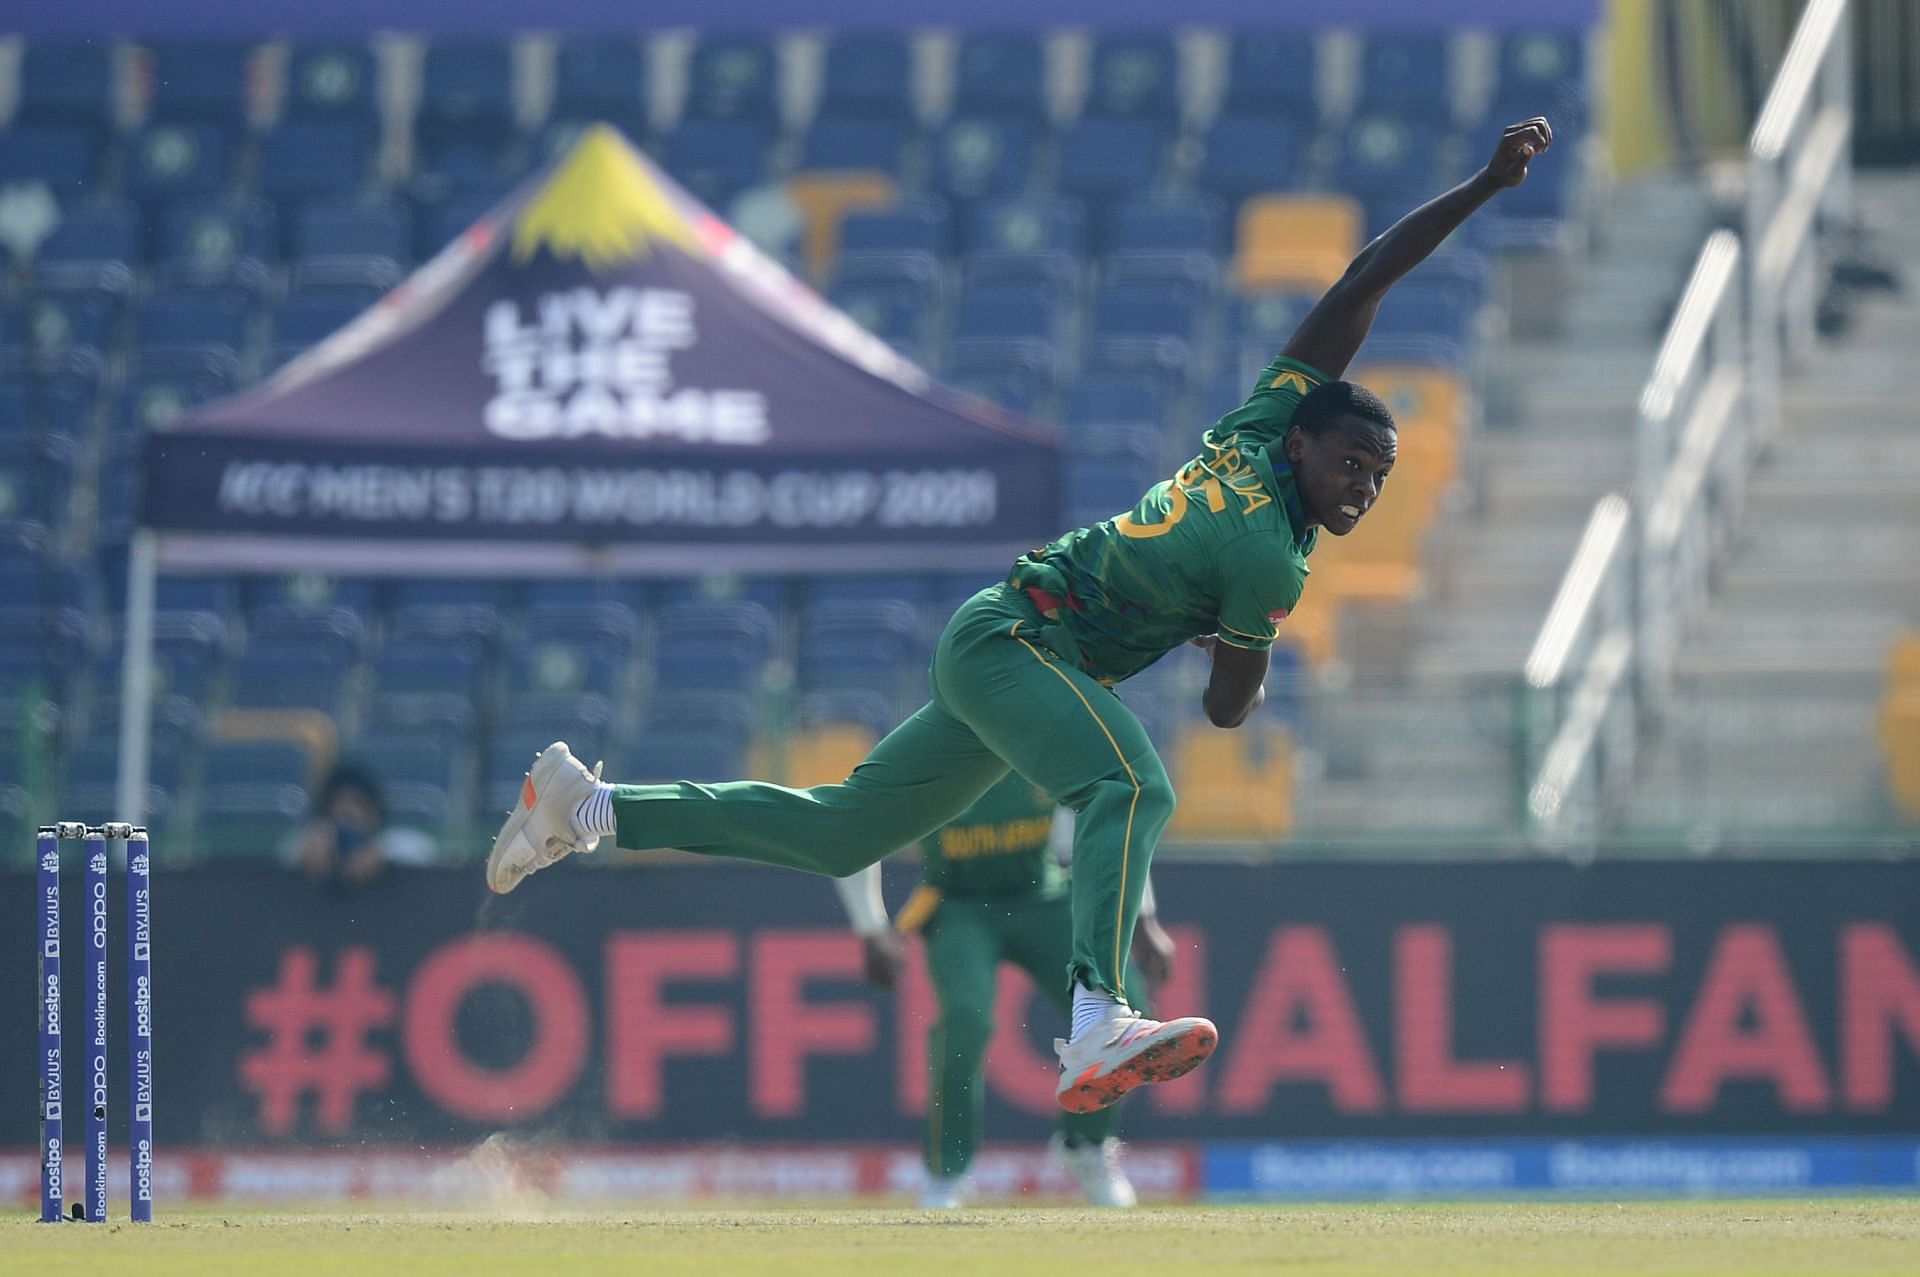 Kagiso Rabada will spearhead the South Africa pace attack in the T20I series against India